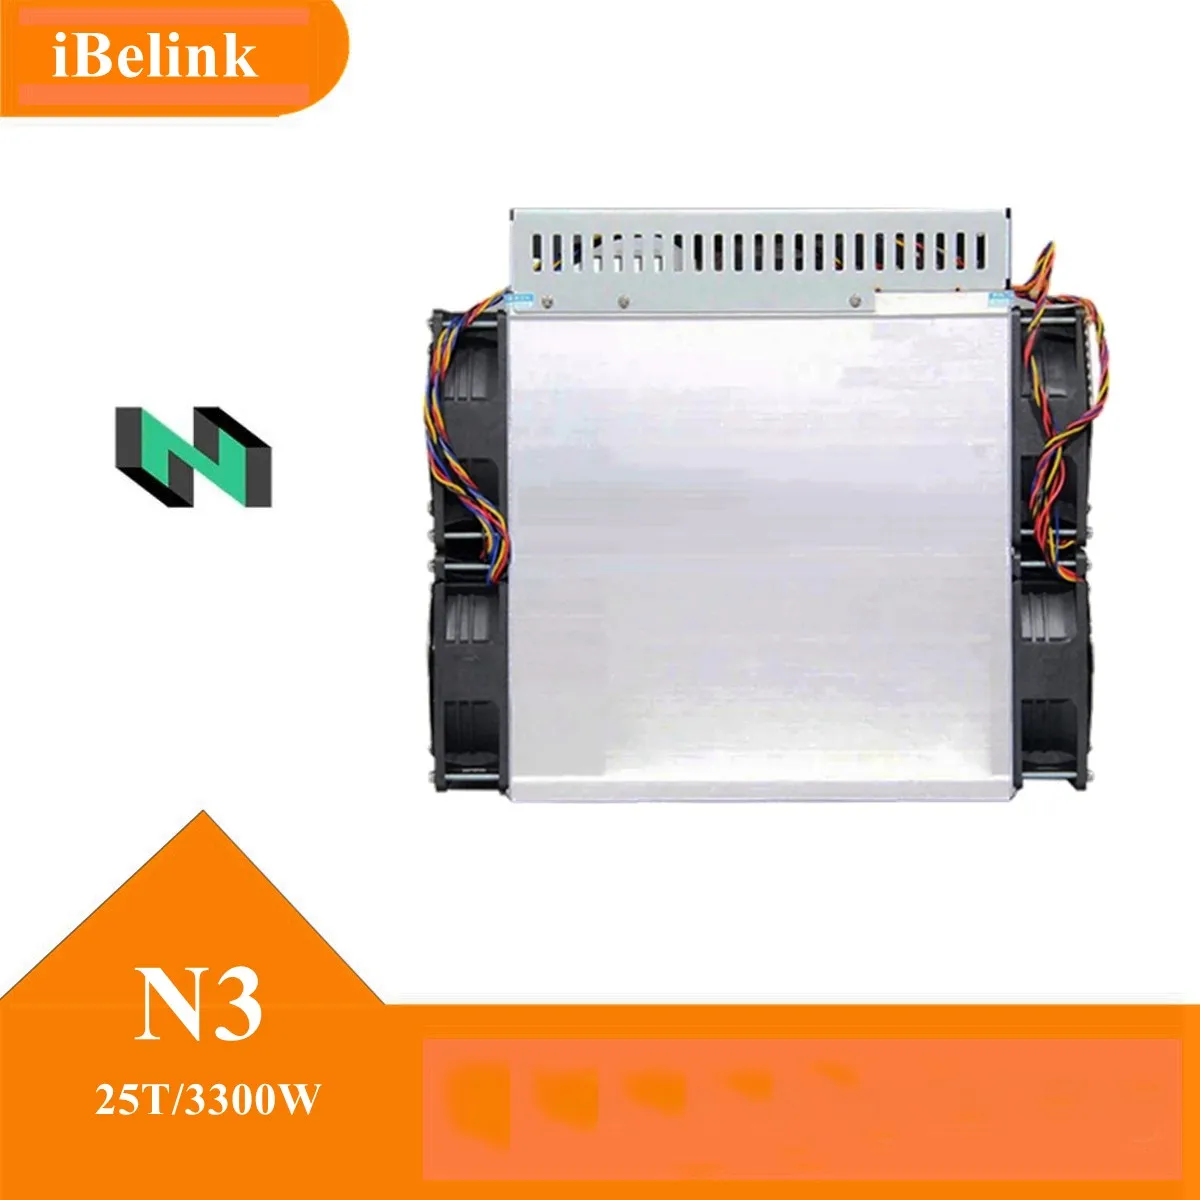 

25Th/S 3300W CKB Powerful Miner from iBeLink BM-N3 With Mining Eaglesong Algorithm